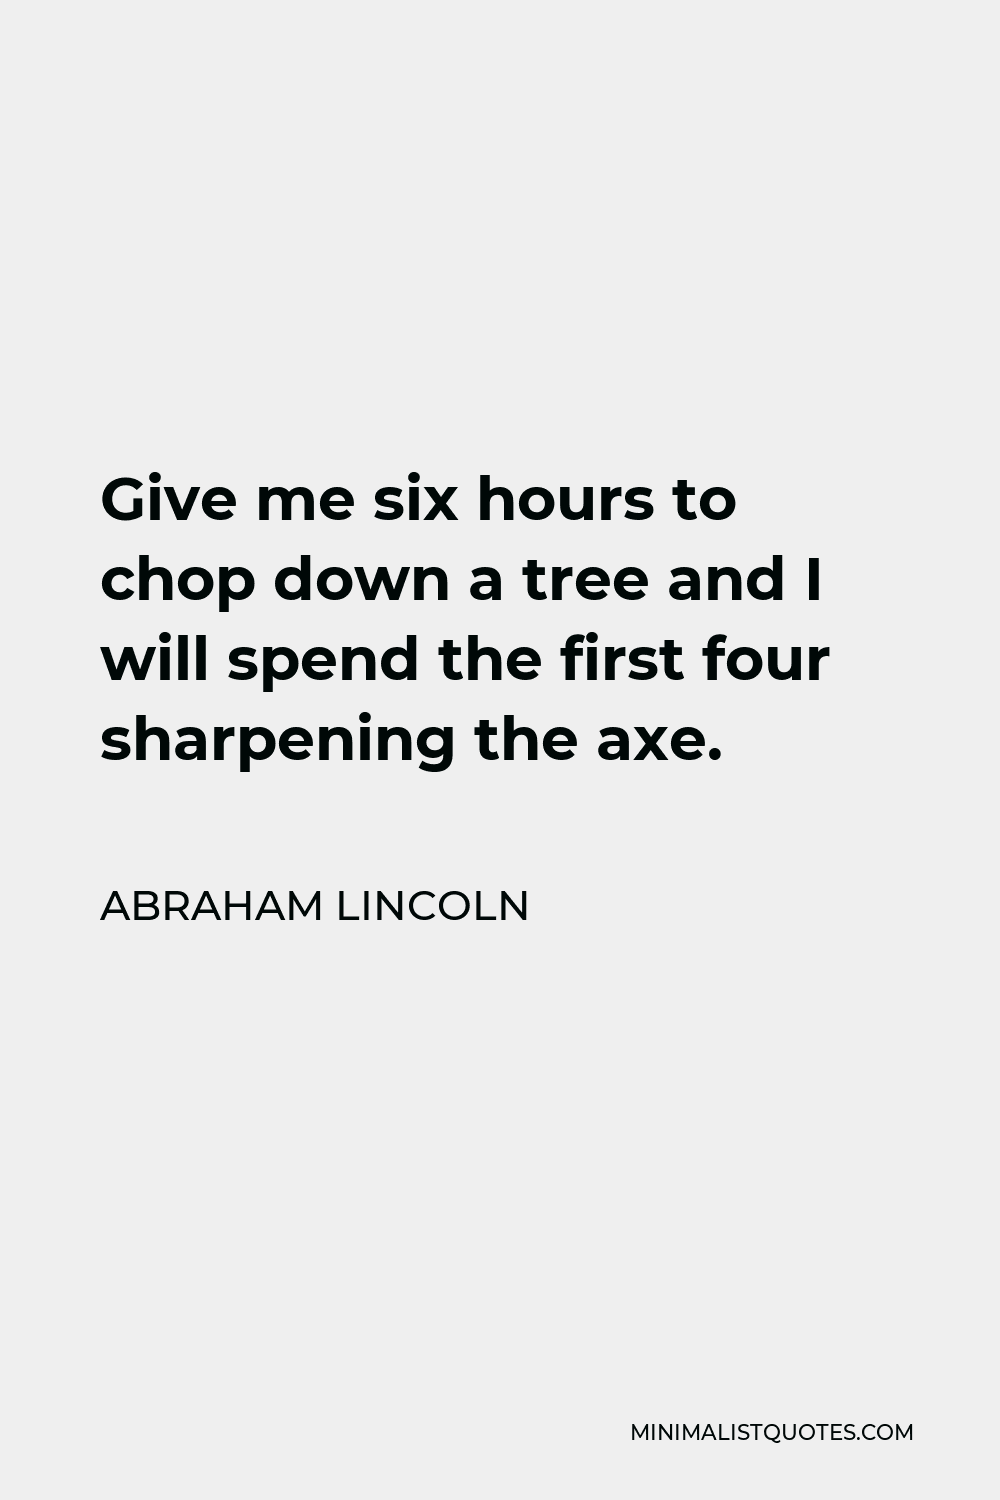 Abraham Lincoln Quote - Give me six hours to chop down a tree and I will spend the first four sharpening the axe.